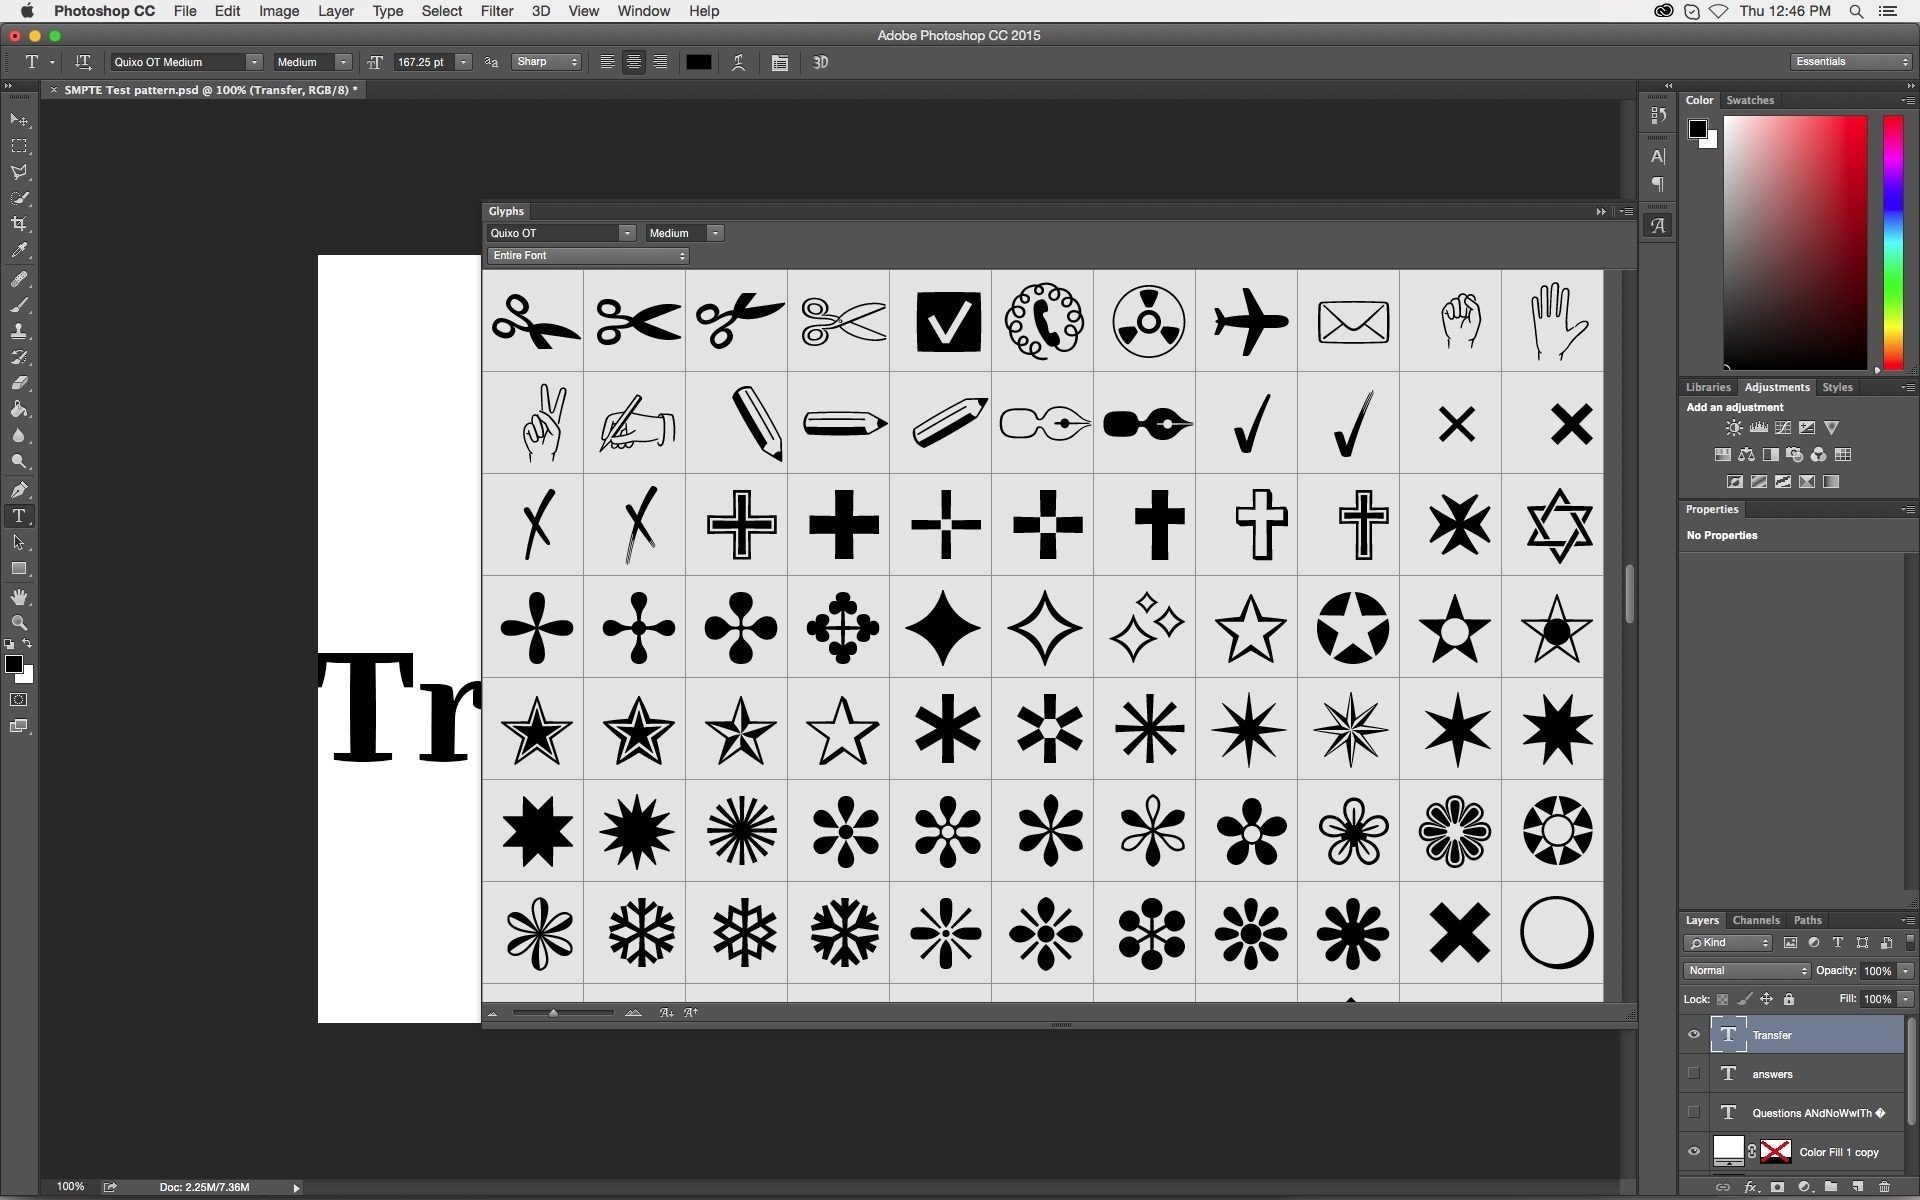 The Glyphs panel in Adobe Photoshop CC 2015 showing the otherwise inaccessible icons and dingbats in [Frank Grießhammer](/designers/frank-griesshammer)'s [FF Quixo](/families/ff-quixo)™ typeface.